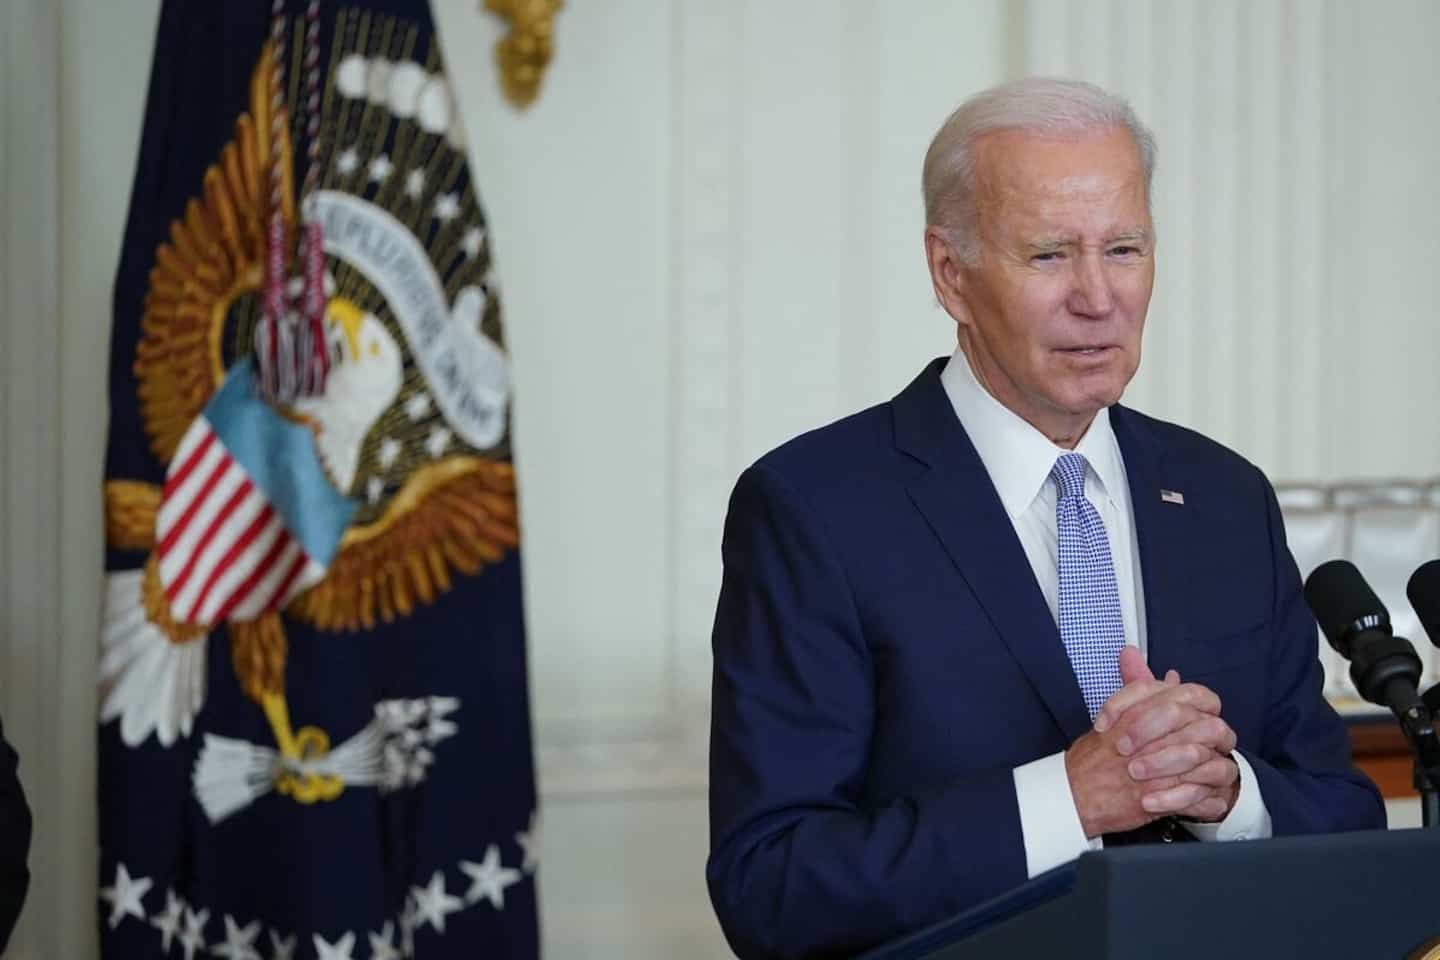 Two years after Capitol storming, Biden condemns 'political violence'